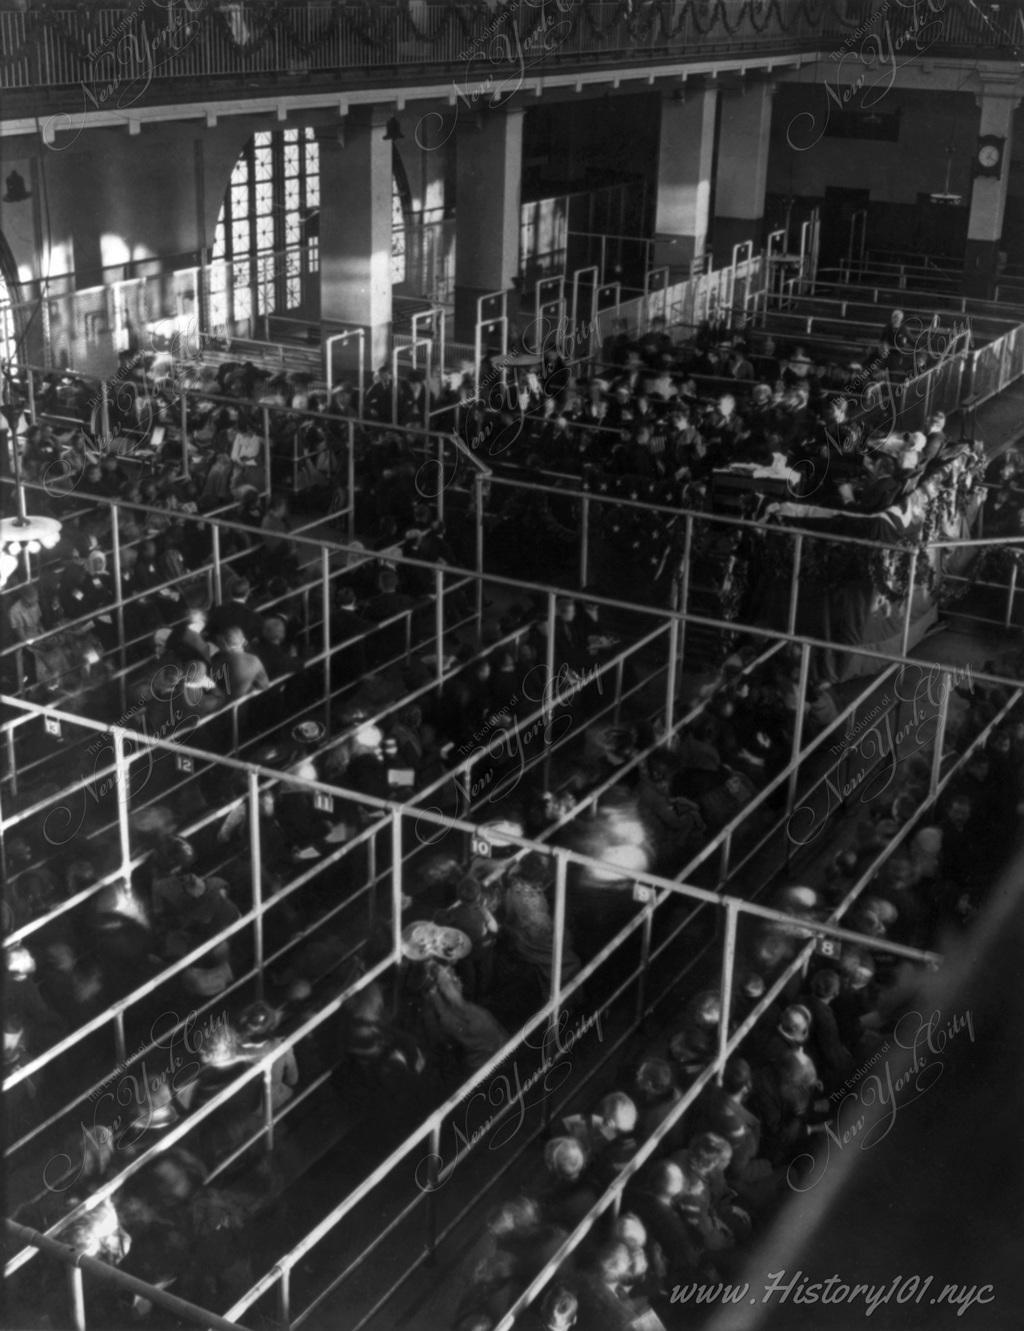 Crowds will the rows, or "pens" at Ellis Island, probably on or near Christmas as evidenced by the decorations.